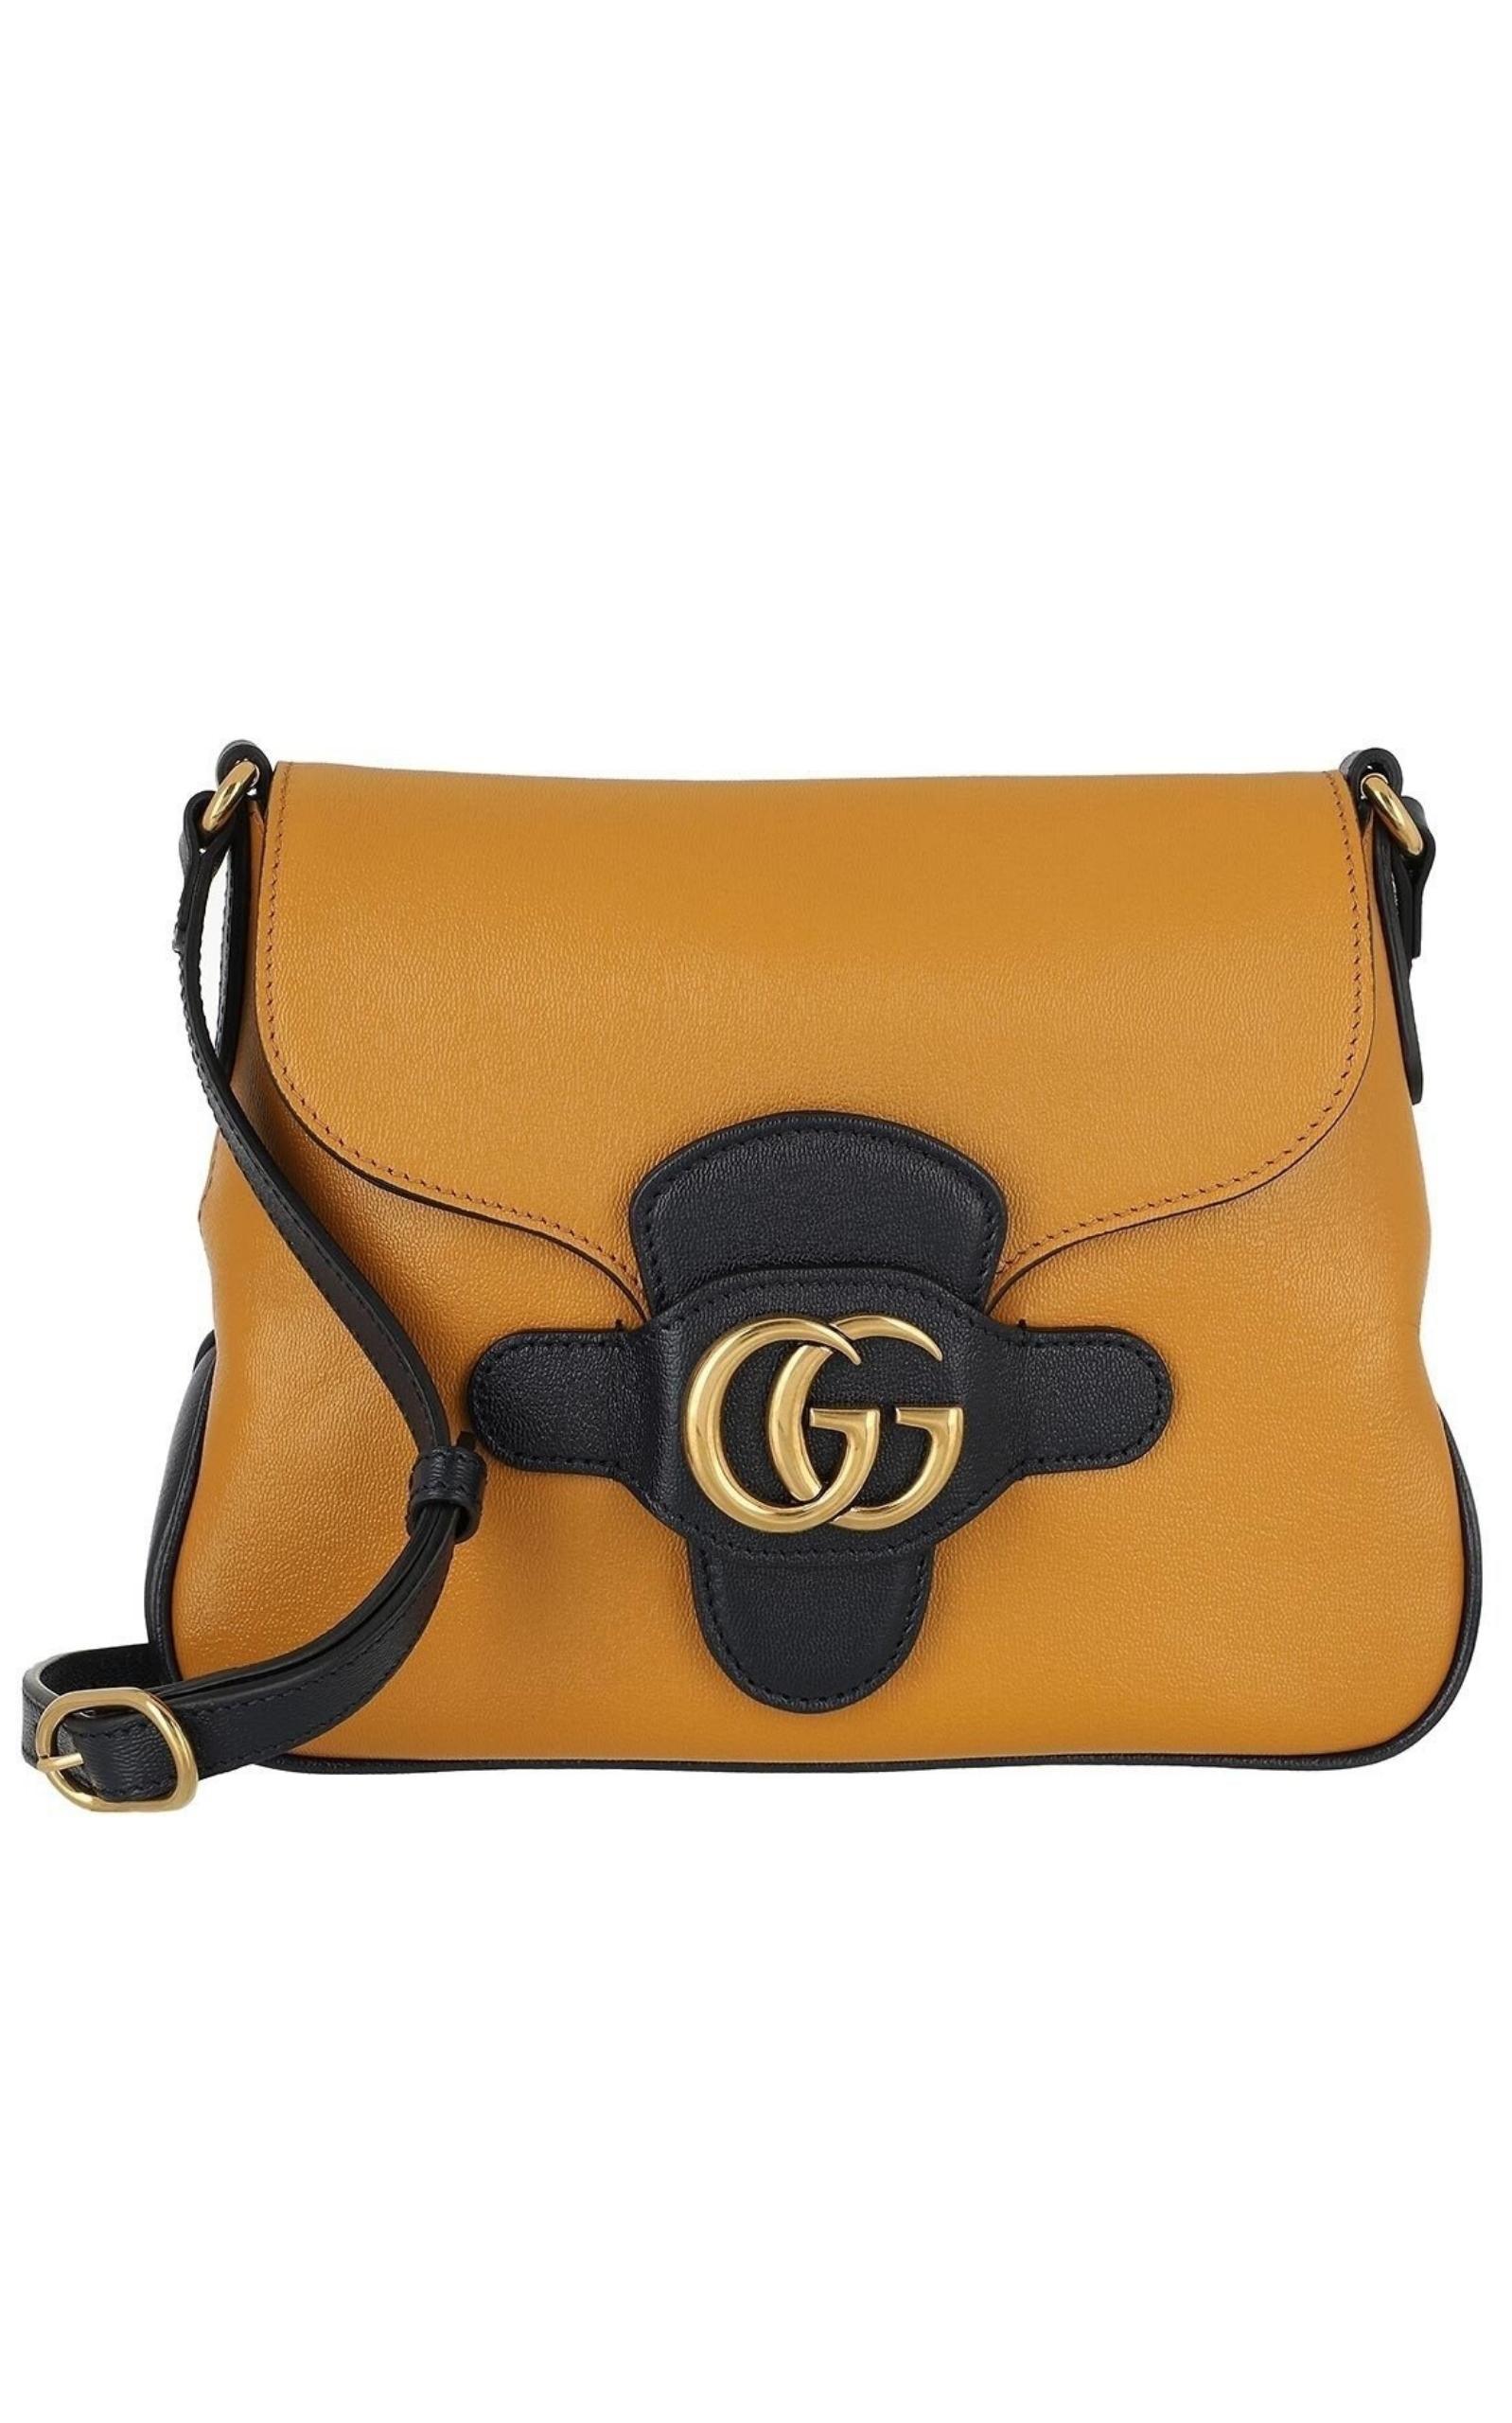 Gucci Small Double G Top Handle Bag